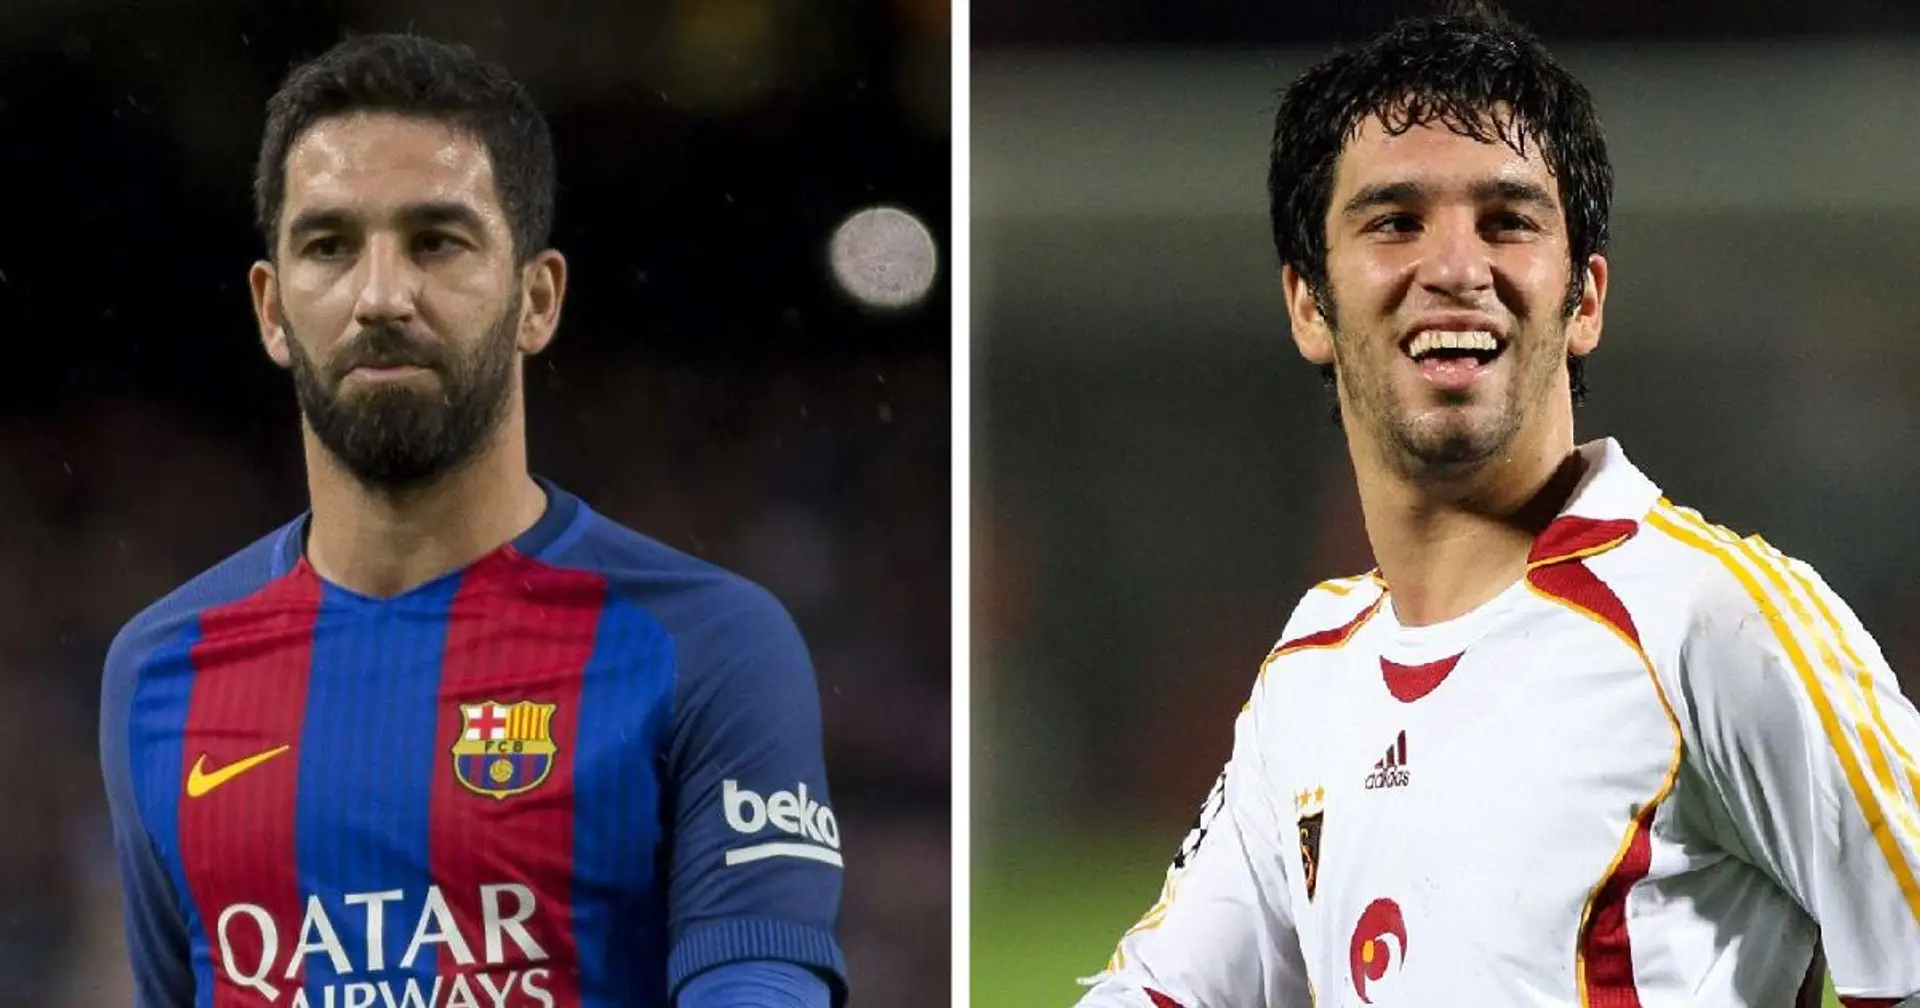 Arda Turan's future said to be solved: Barca's forgotten man to return to Galatasaray